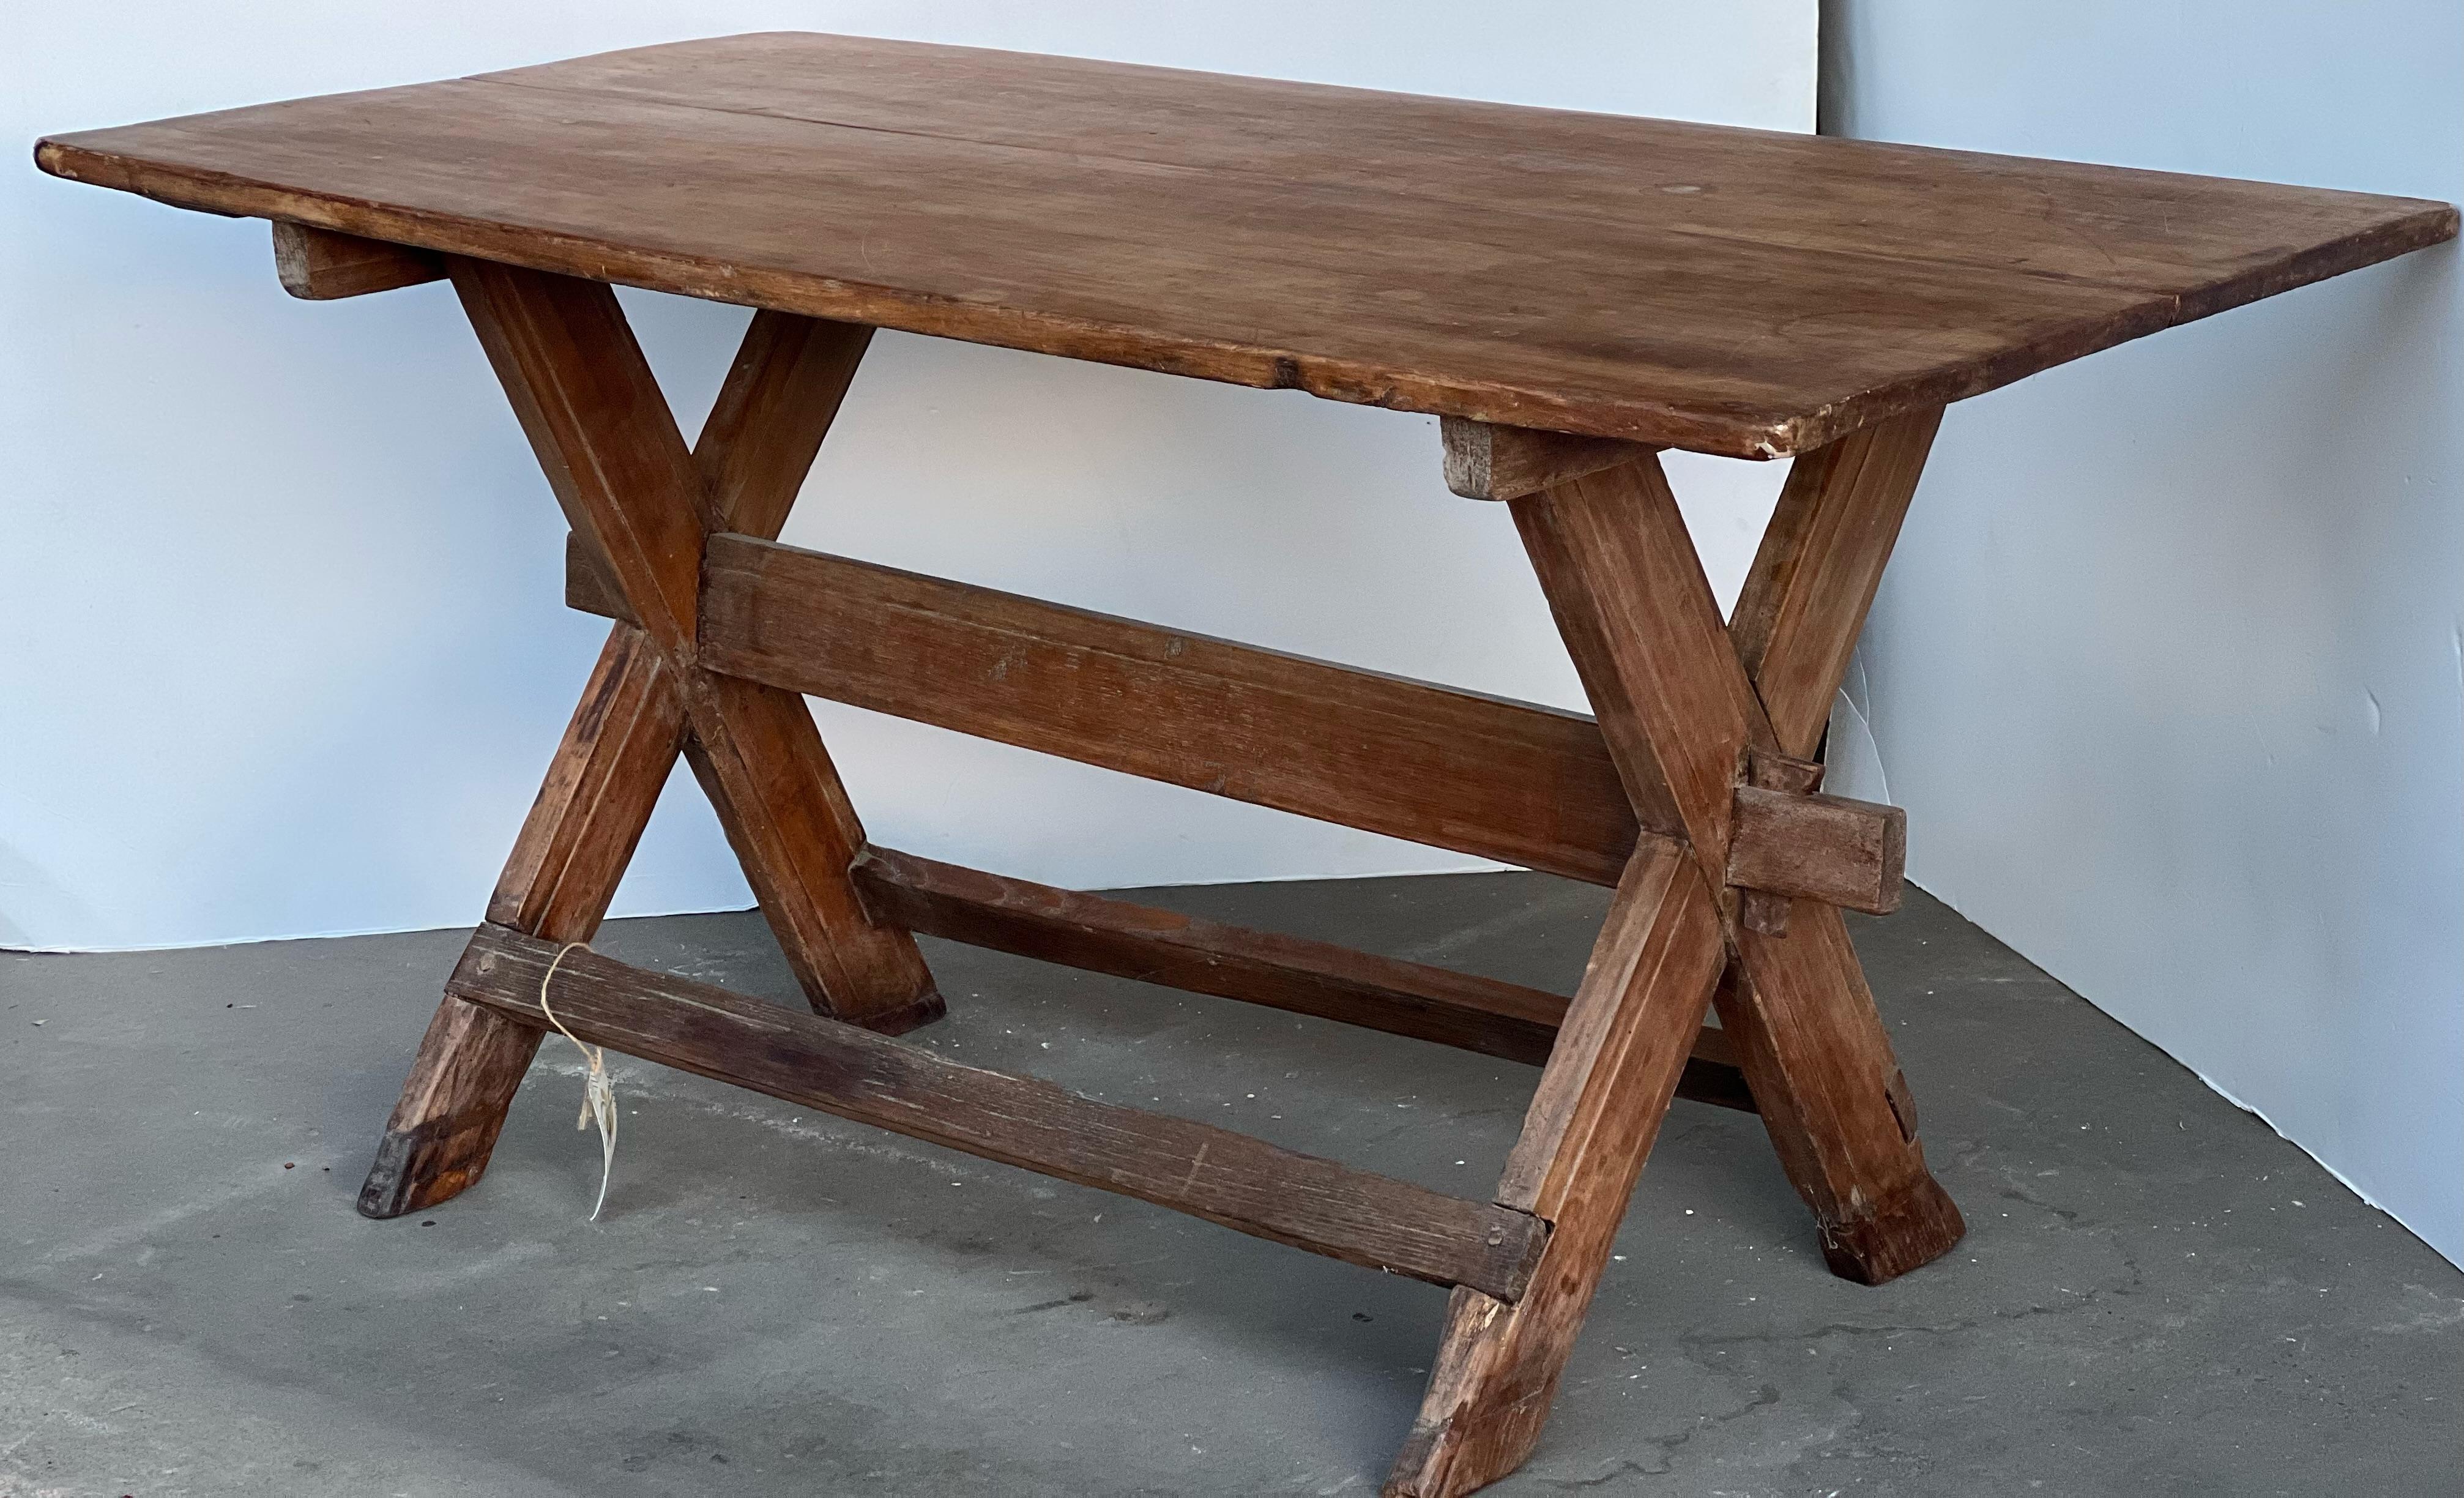 Here is a beautiful farm table that features a cross leg. Perfect for a console table, desk or small kitchen area. This unique piece can also be used as a kitchen island. Repairs have been made to this piece. It is on good condition and is sturdy.